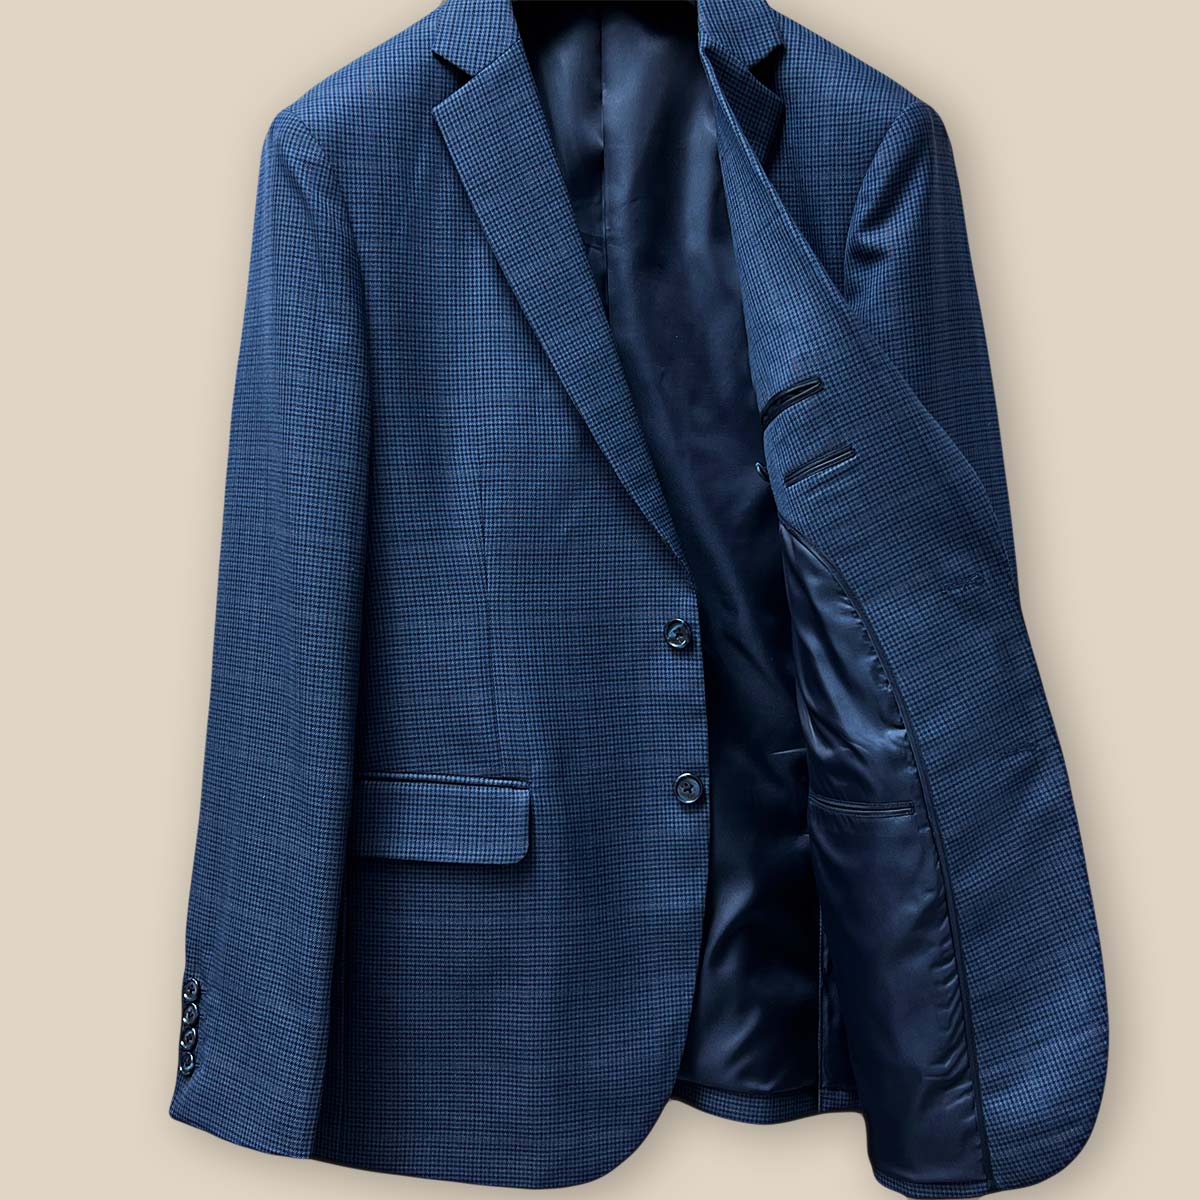 Interior view of the left side of the prussian blue suit jacket, highlighting the dark blue bemberg plain lining.